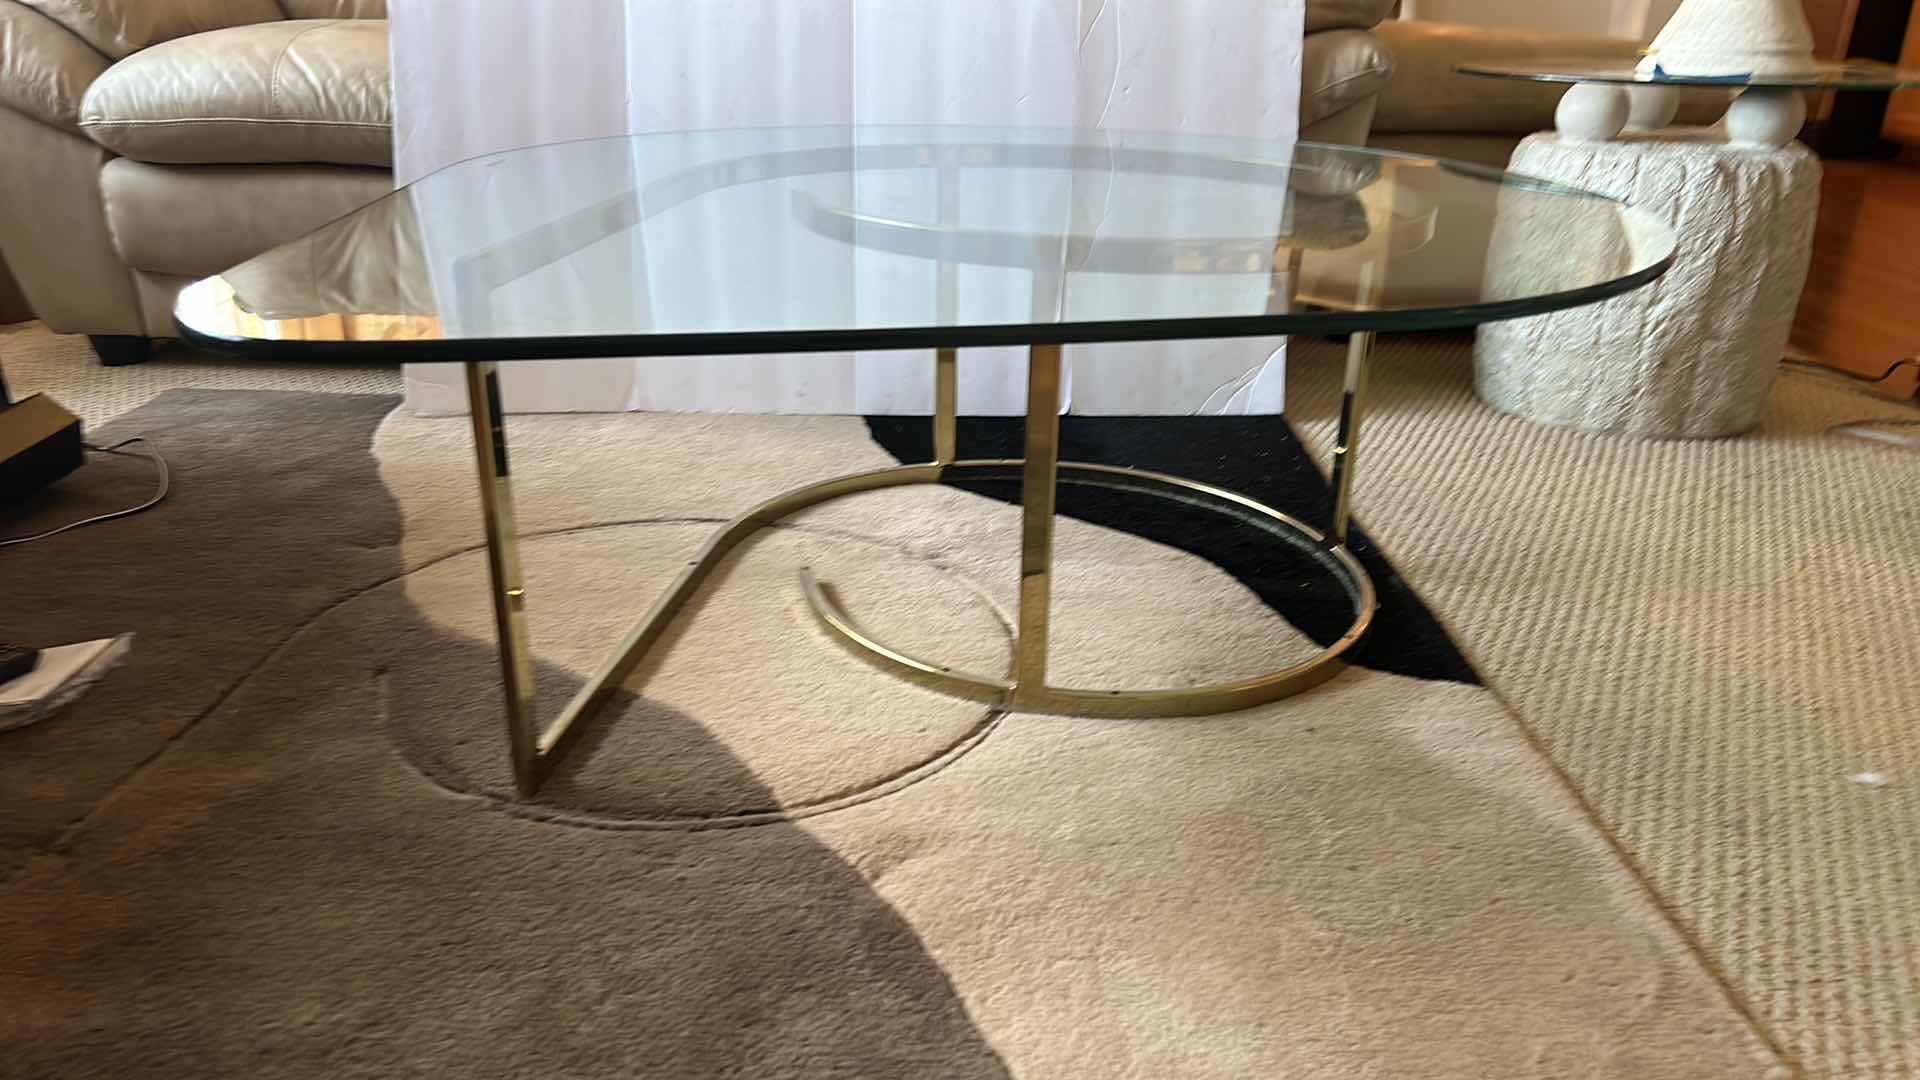 Photo 6 of VINTAGE HOLLYWOOD REGENCY TEARDROP GLASS AND BRASS COFFEE TABLE
